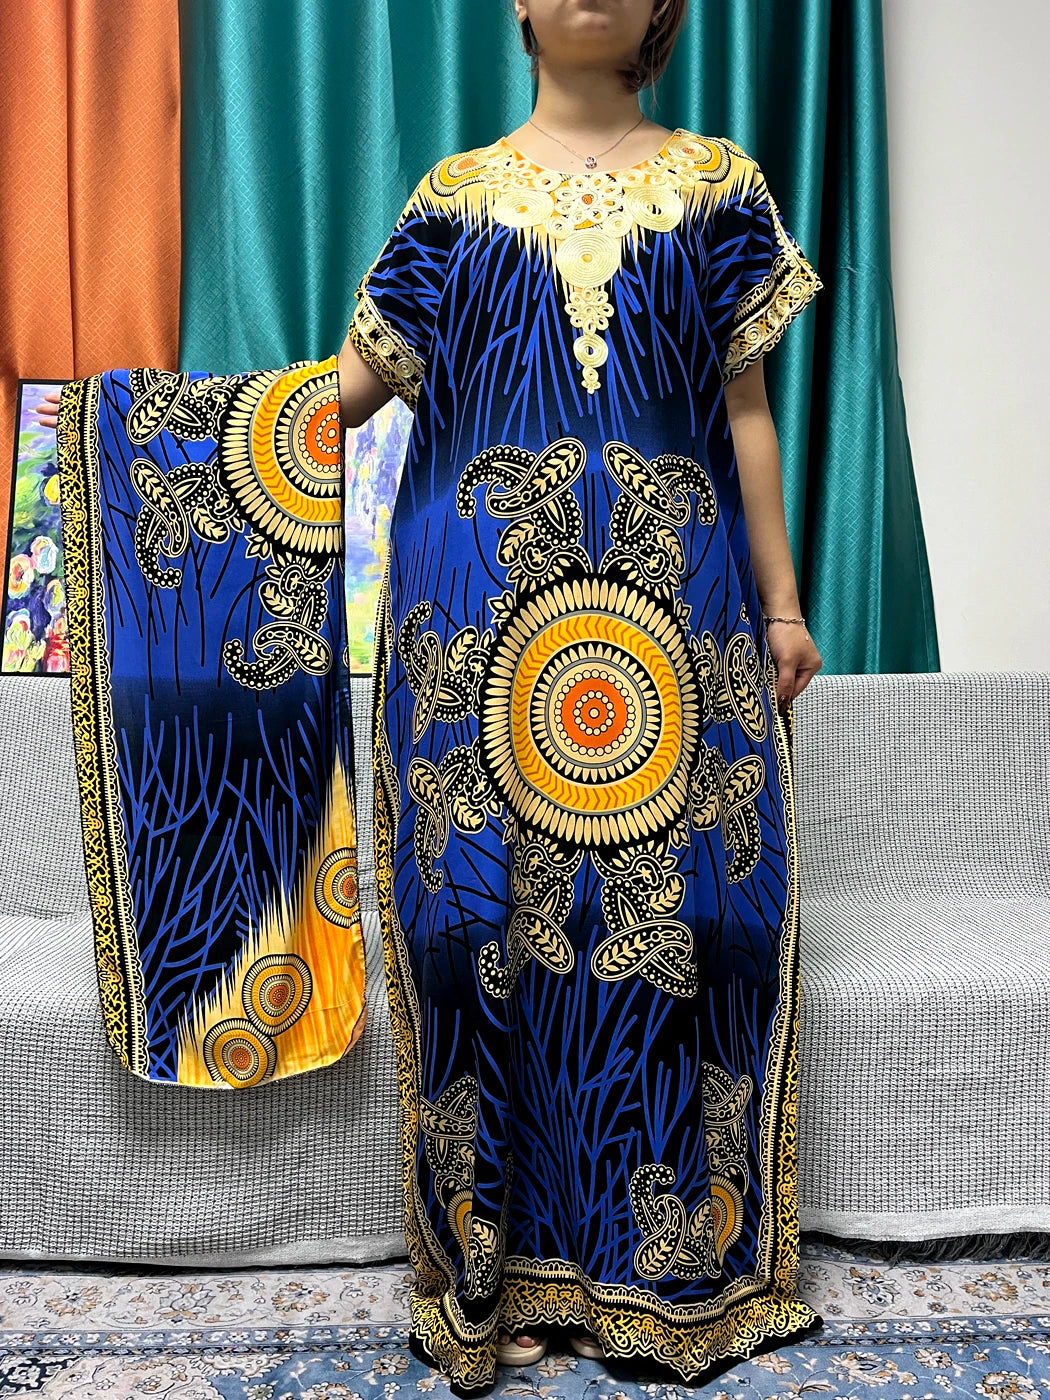 Women Print Appliques Cotton Traditional Kanga Clothing Loose Femme Robe African Nigeria Dresses With Turban - Flexi Africa - Flexi Africa offers Free Delivery Worldwide - Vibrant African traditional clothing showcasing bold prints and intricate designs